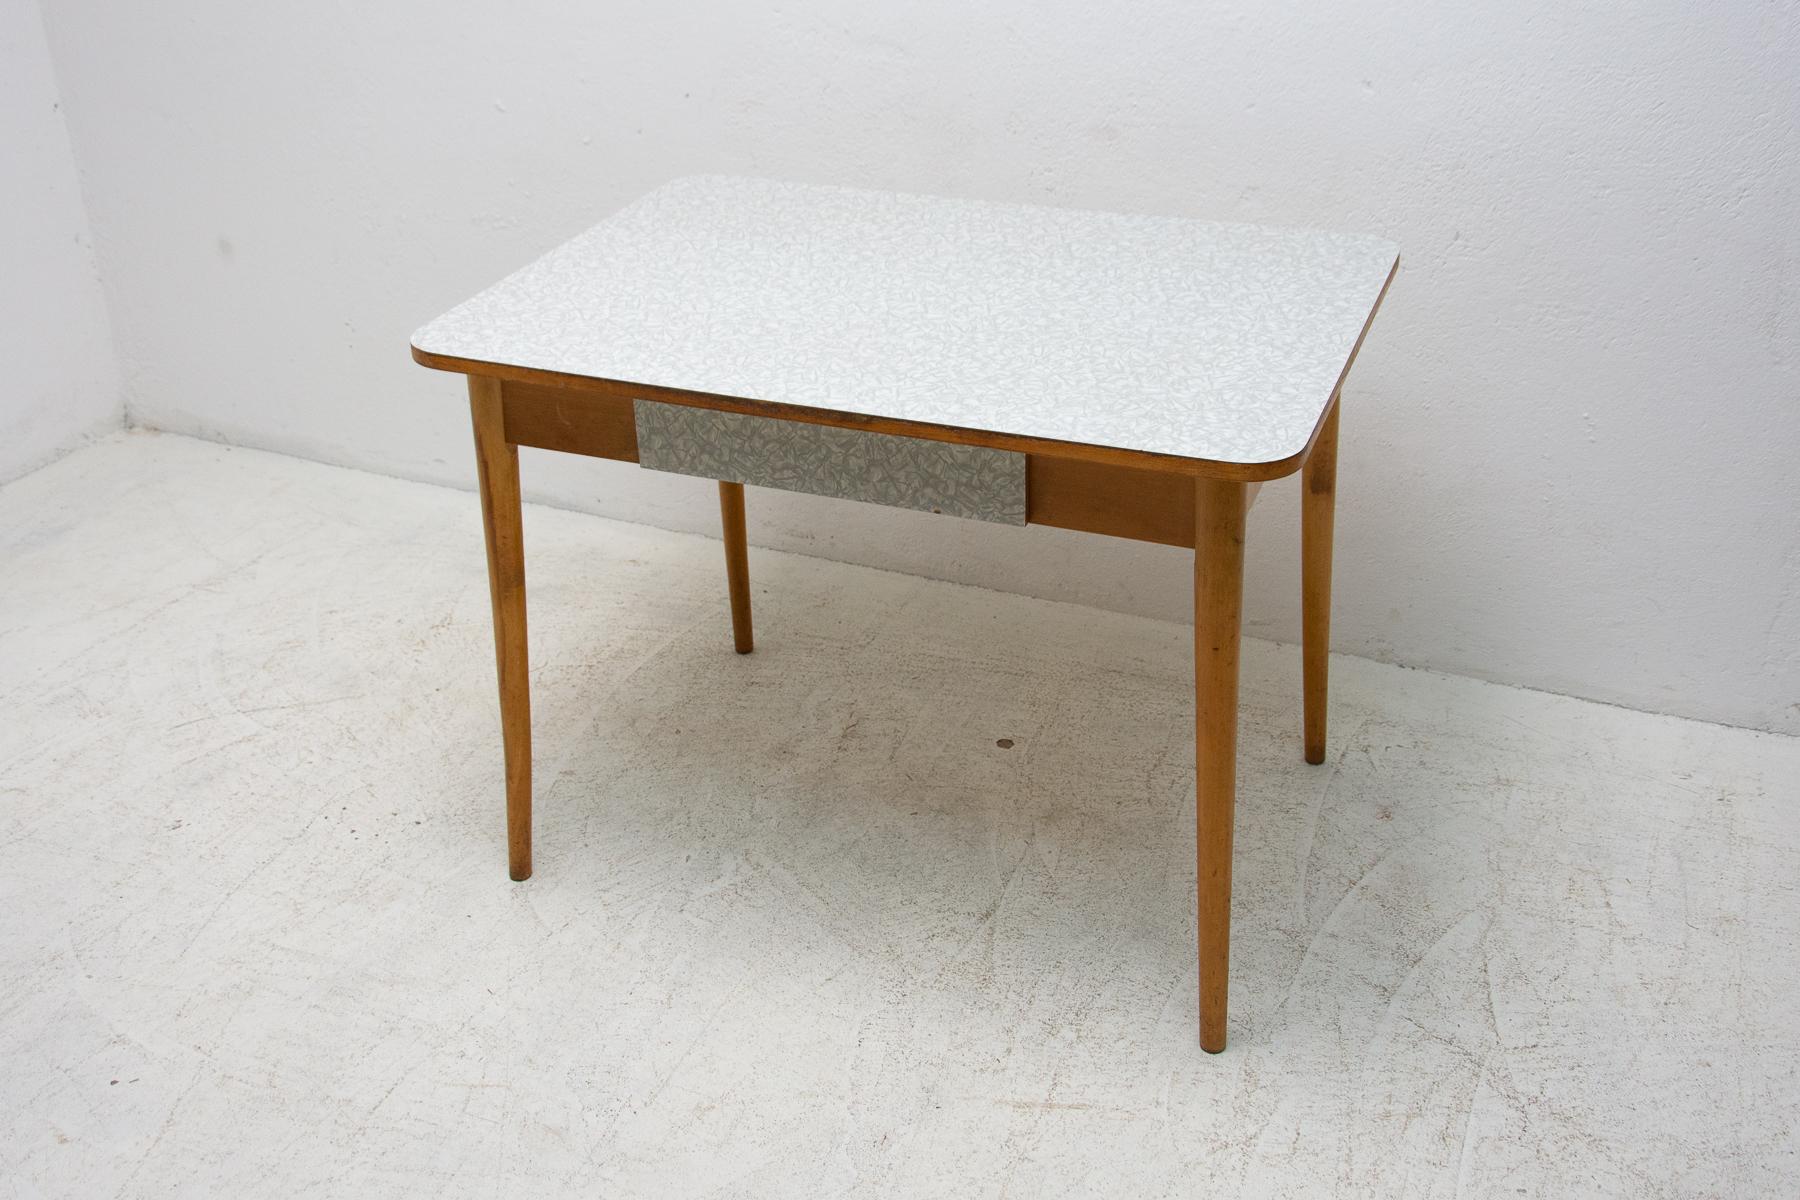  Midcentury Formica and Wood Central Table, Czechoslovakia, 1960's For Sale 10